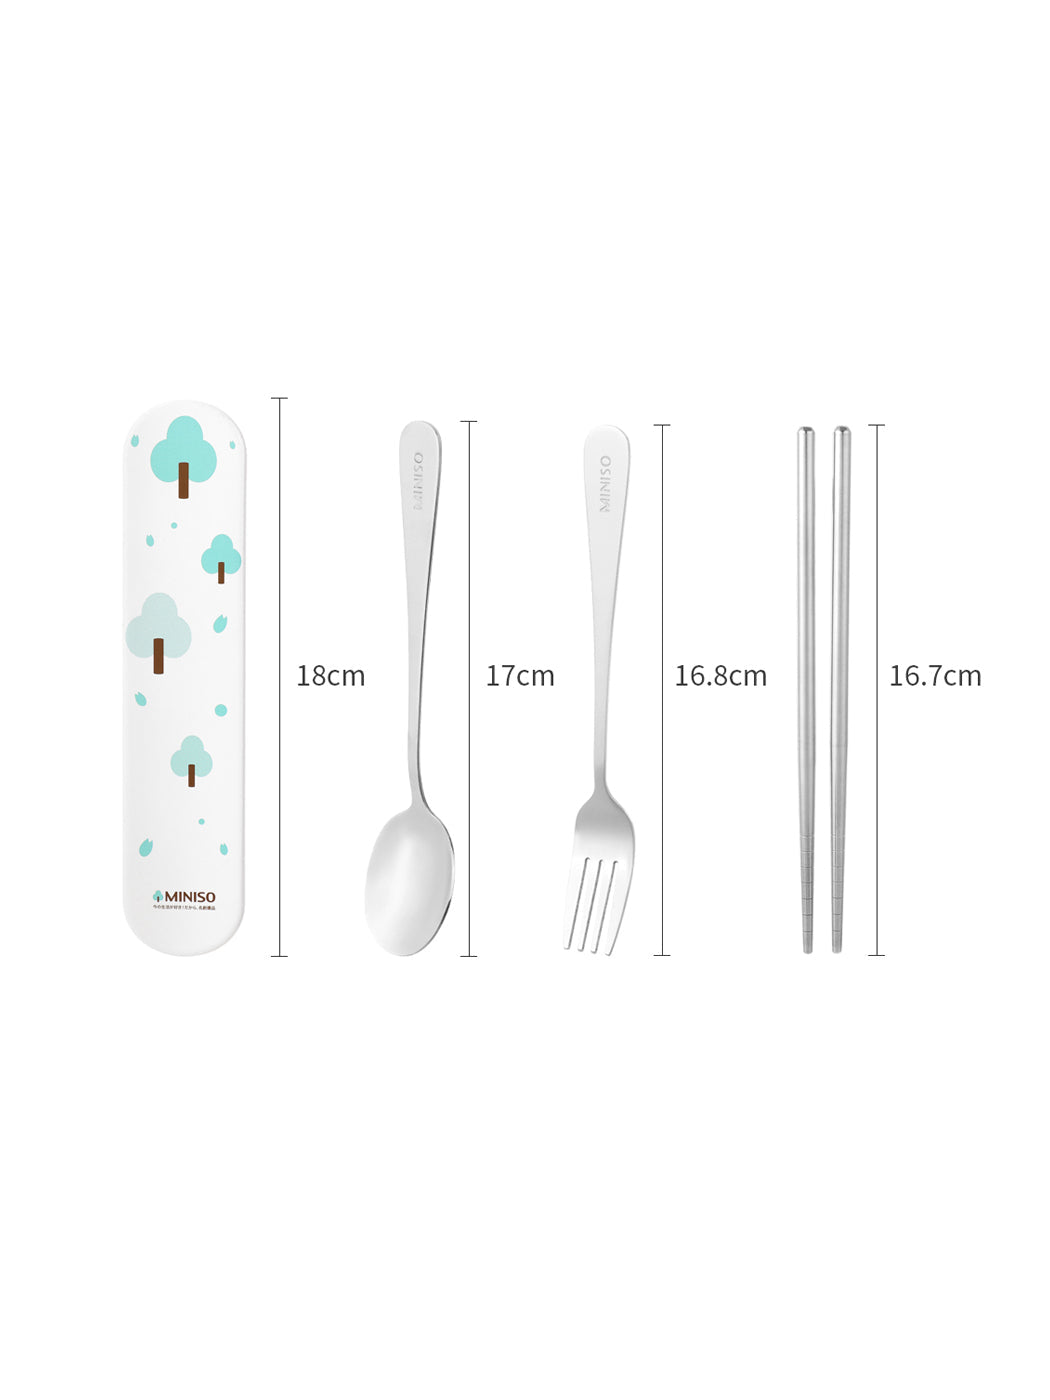 MINISO FOUR-PIECES TABLEWARE 0100023311 CUTLERY SET